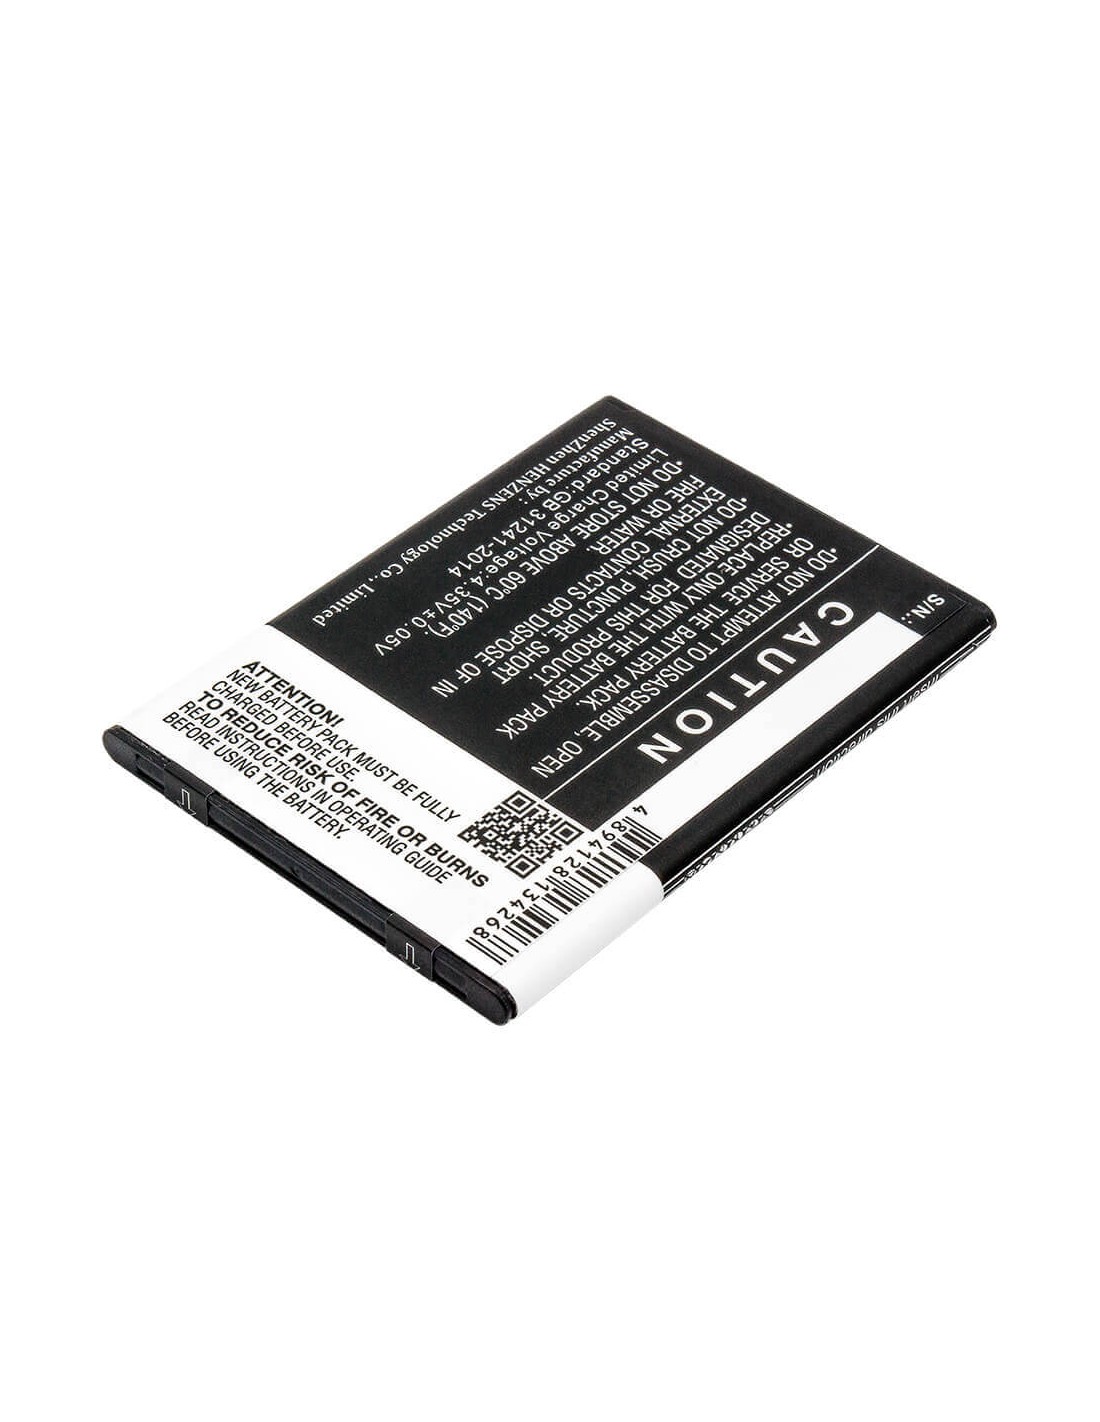 Battery for Samsung, Galaxy J1 Ace, Galaxy J1 Ace 3g Duos 3.8V, 1800mAh - 6.84Wh